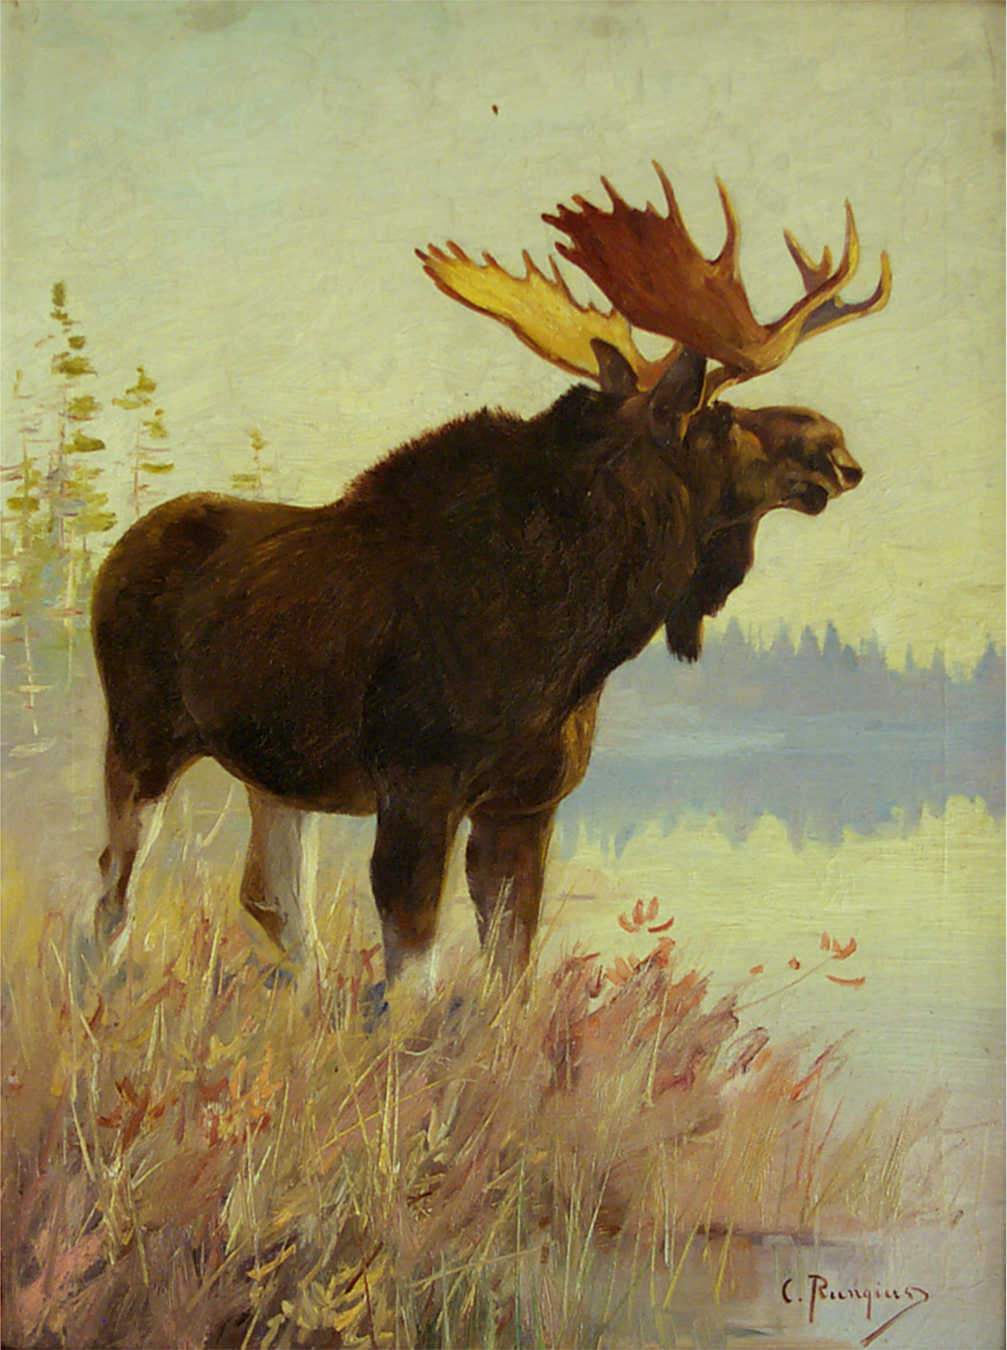 Carl Rungius (American, b. Germany, 1869–1959), Sportsmen's Moose, 1907. Oil on canvas. 28 x 21 inches. Purchased with Funds Generously Donated by the Robert S. and Grayce B. Kerr Foundation, National Museum of Wildlife Art. © Estate of Carl Rungius.